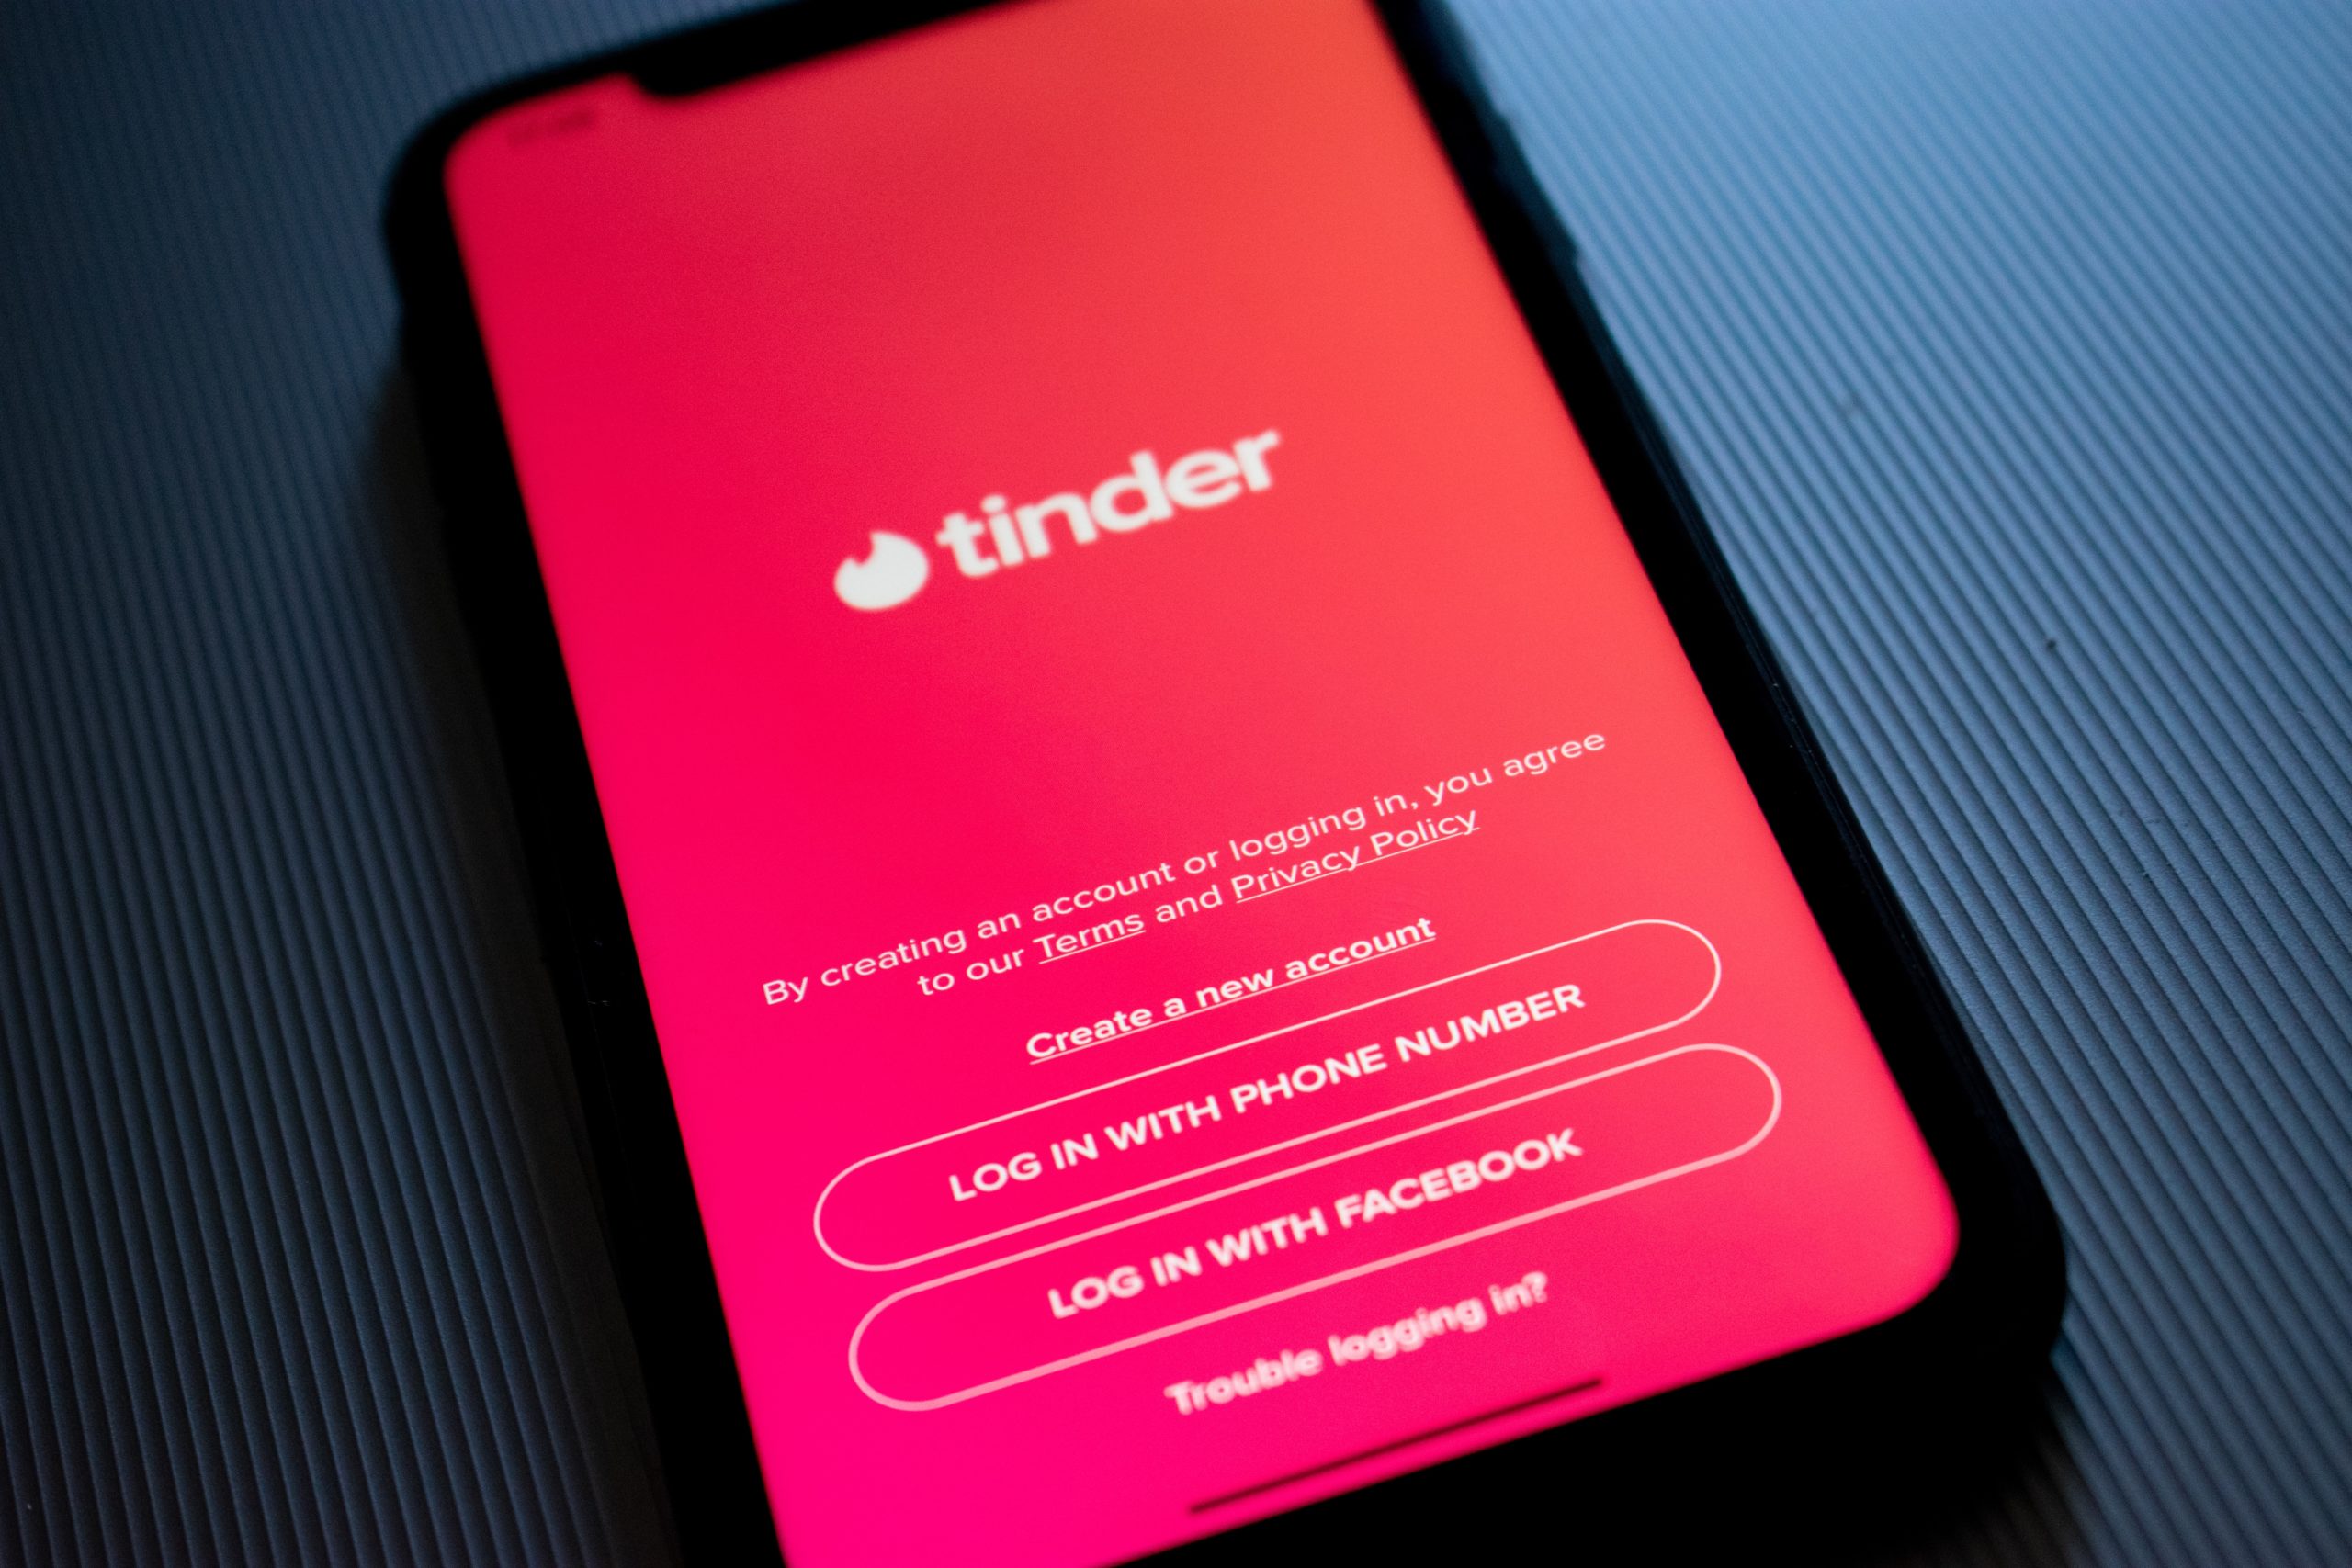 |Sharing your personal phone number while online dating opens yourself up to some risk. Getting a second number is easy and can help protect yourself.